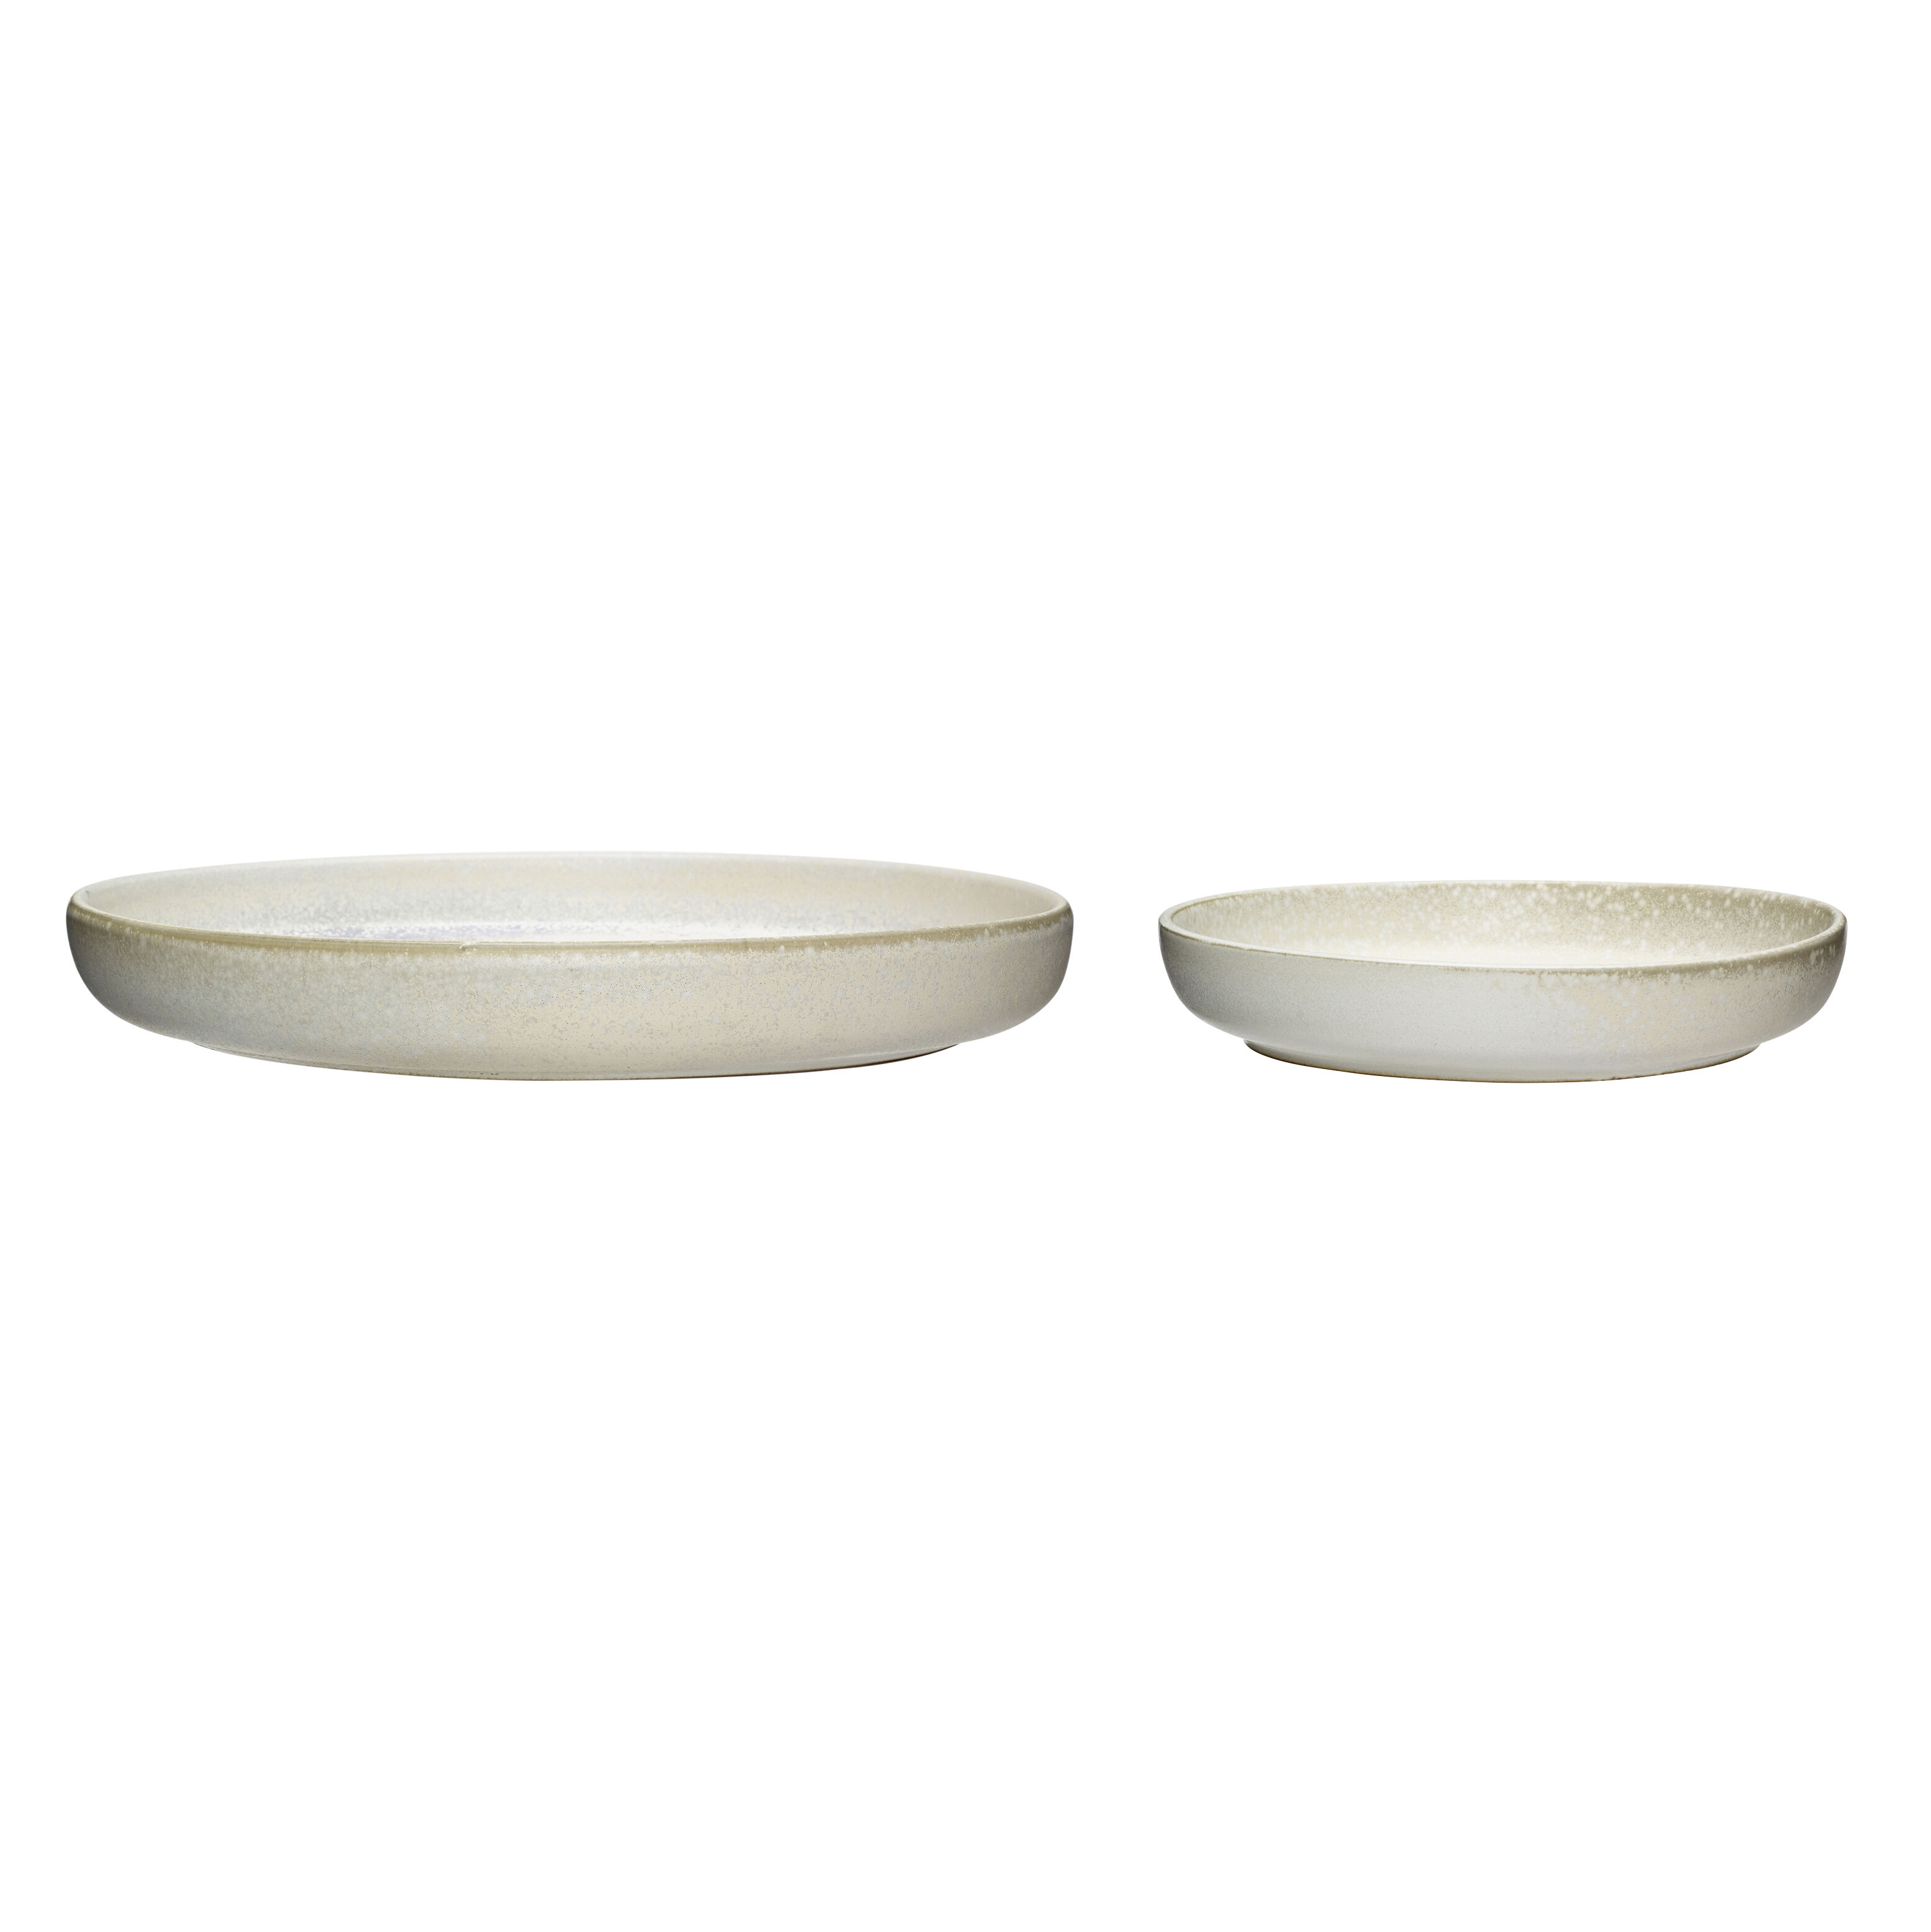 Hubsch Set of 2 Clay Plates in Off White